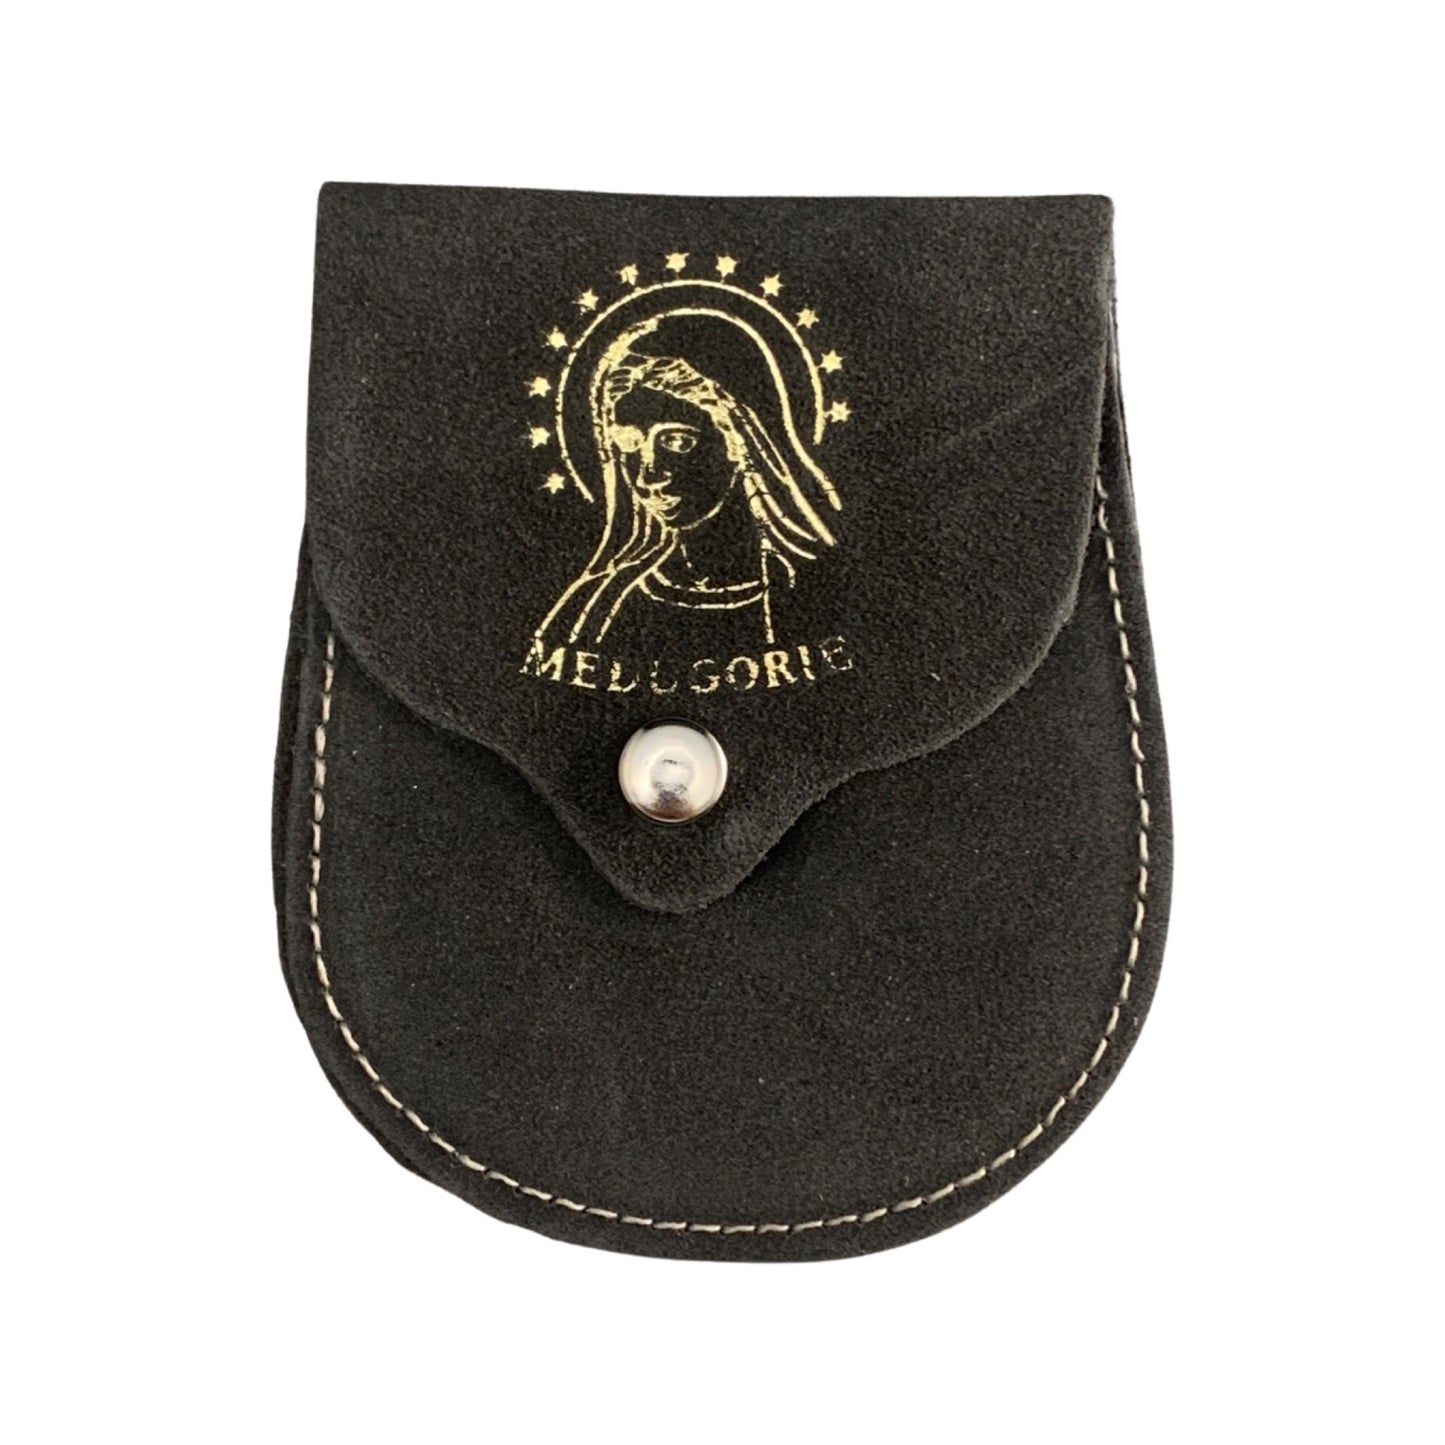 Queen of Peace Leather Pouch of Assorted Colors